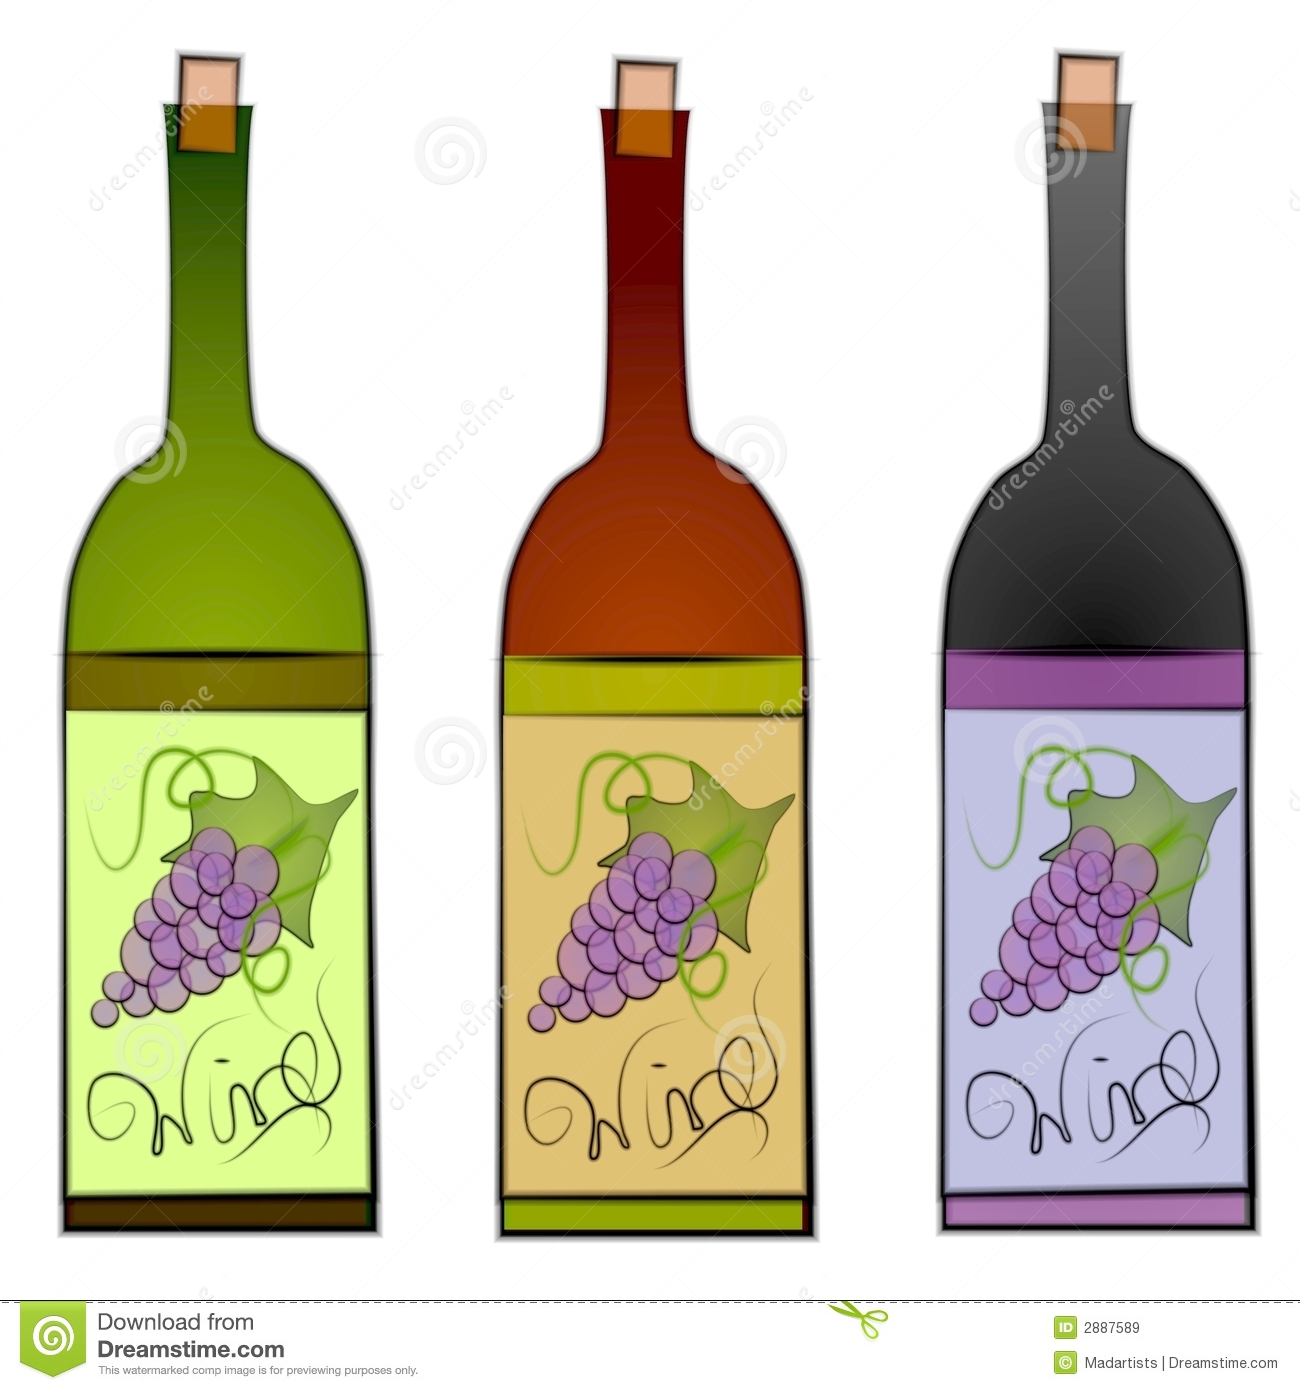 Clip Art Illustration Of A Collection Of 3 Wine Bottles In Green Red